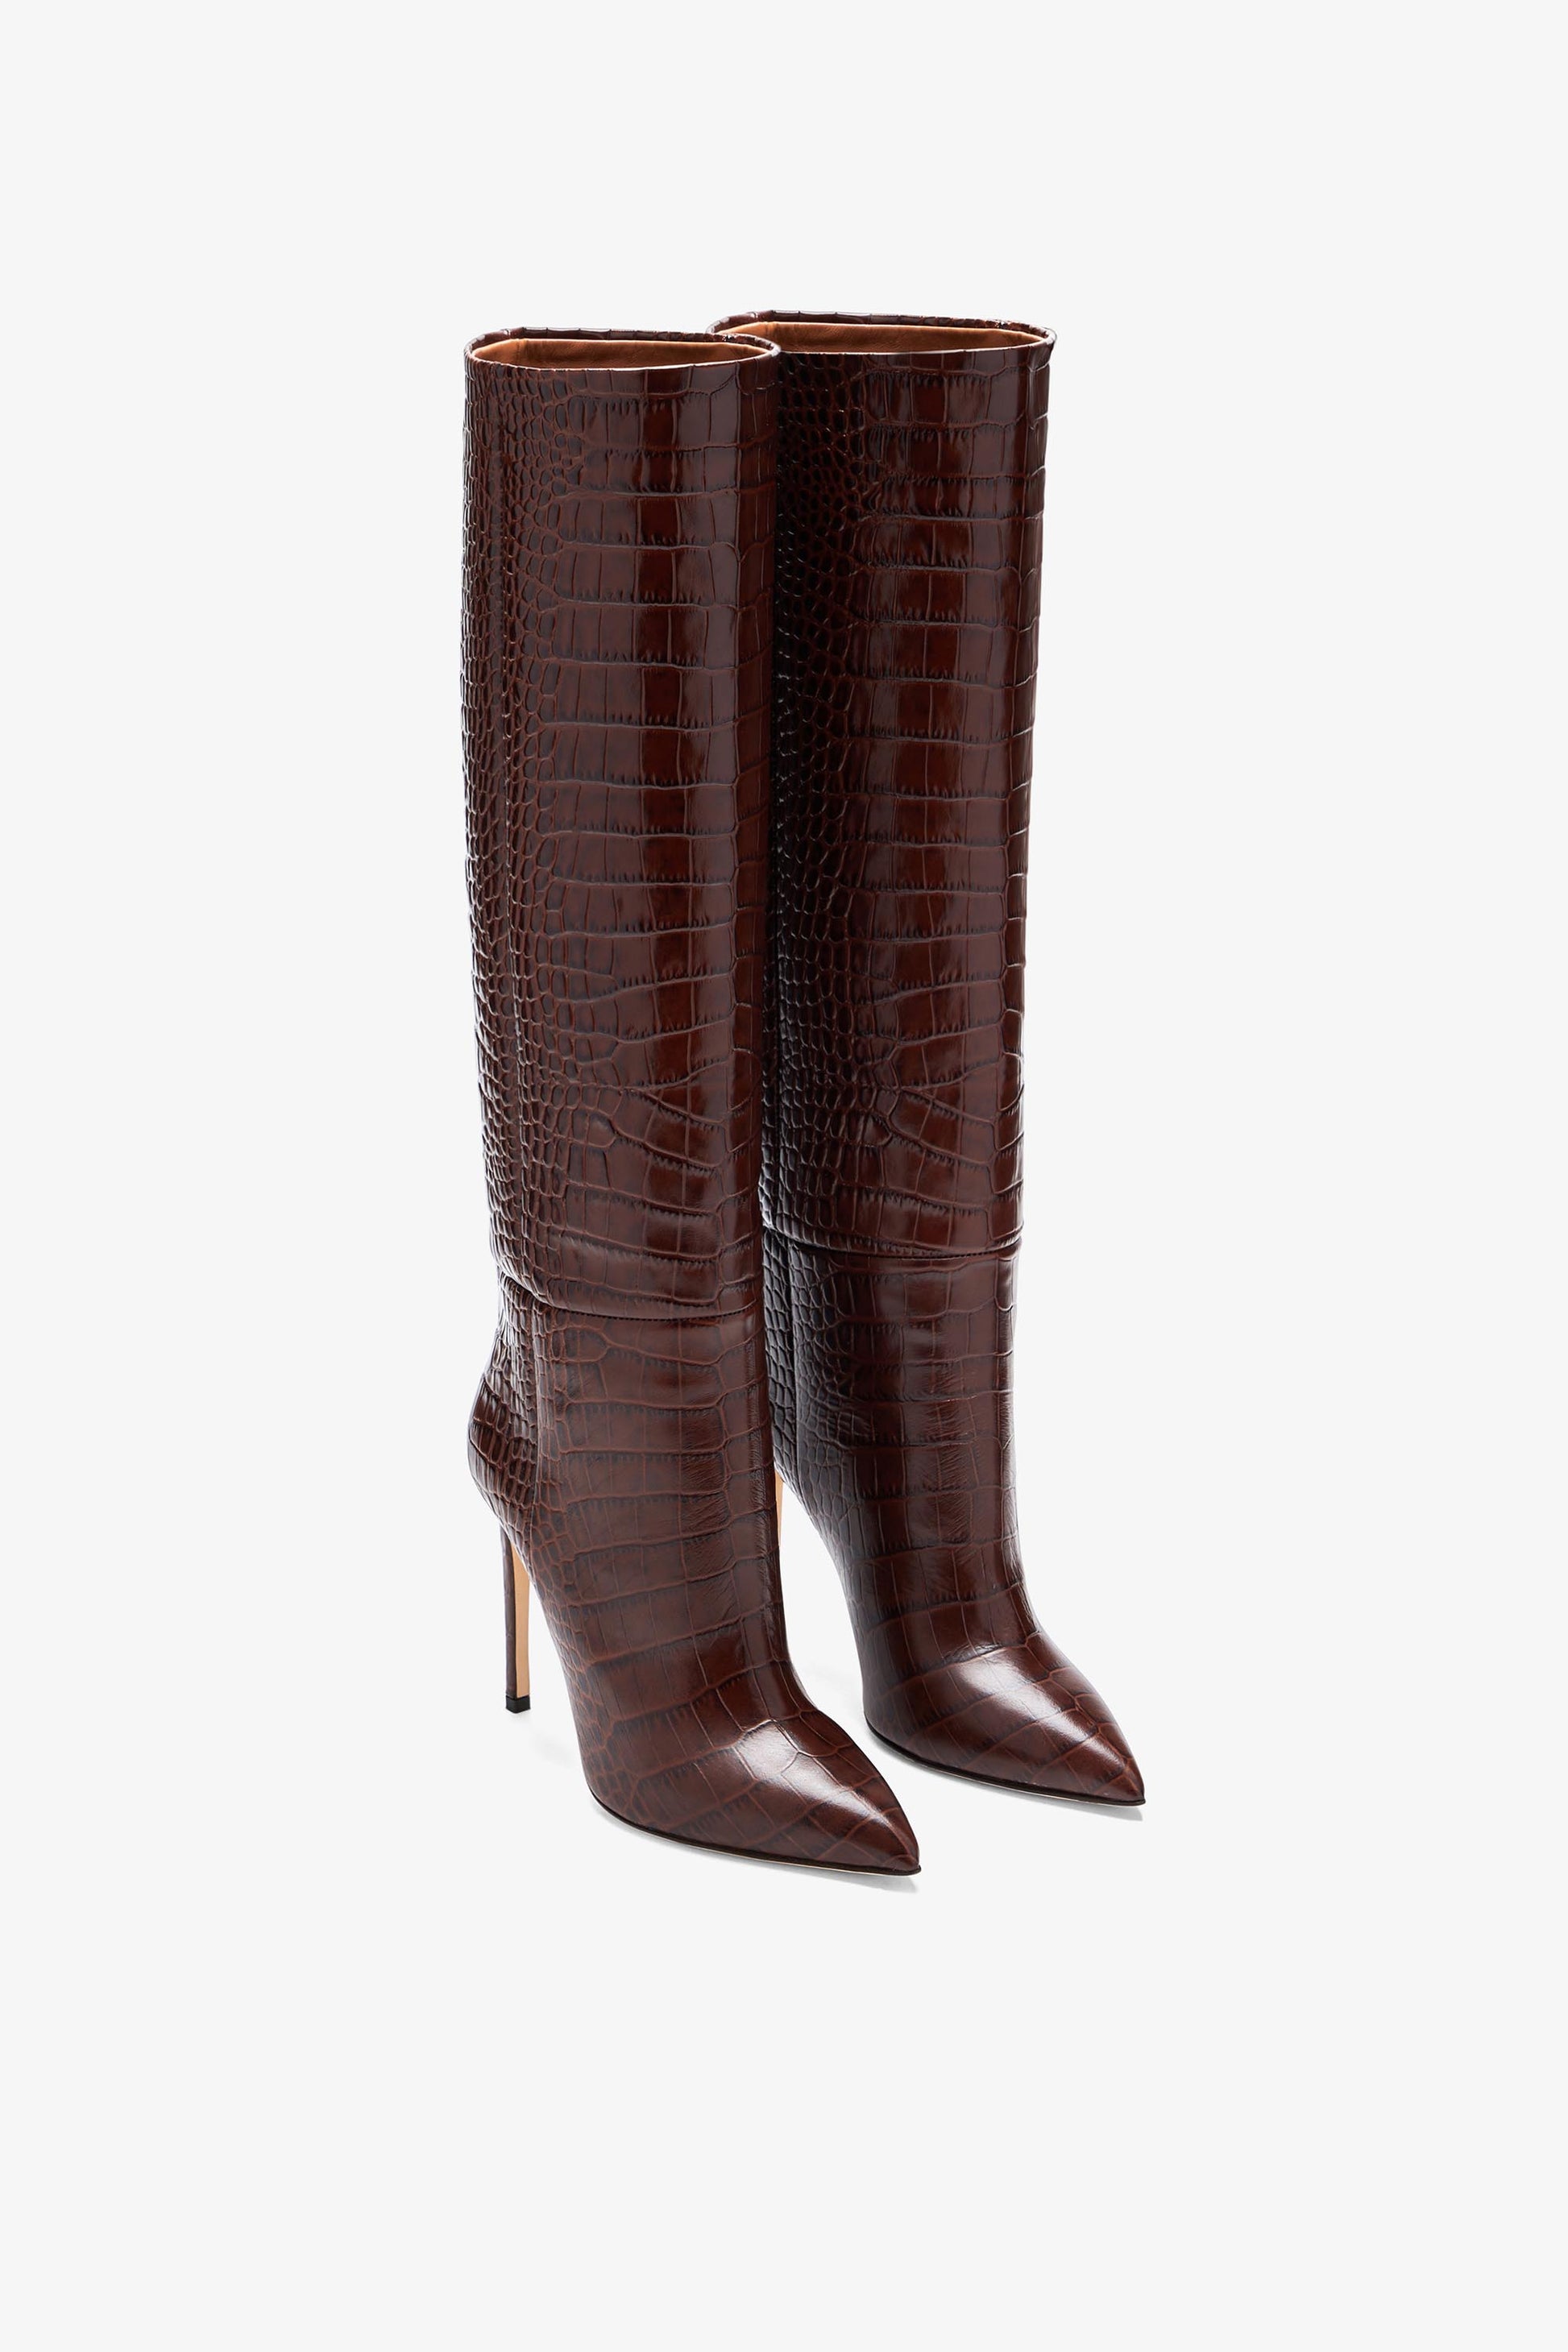 Choc brown embossed leather boot